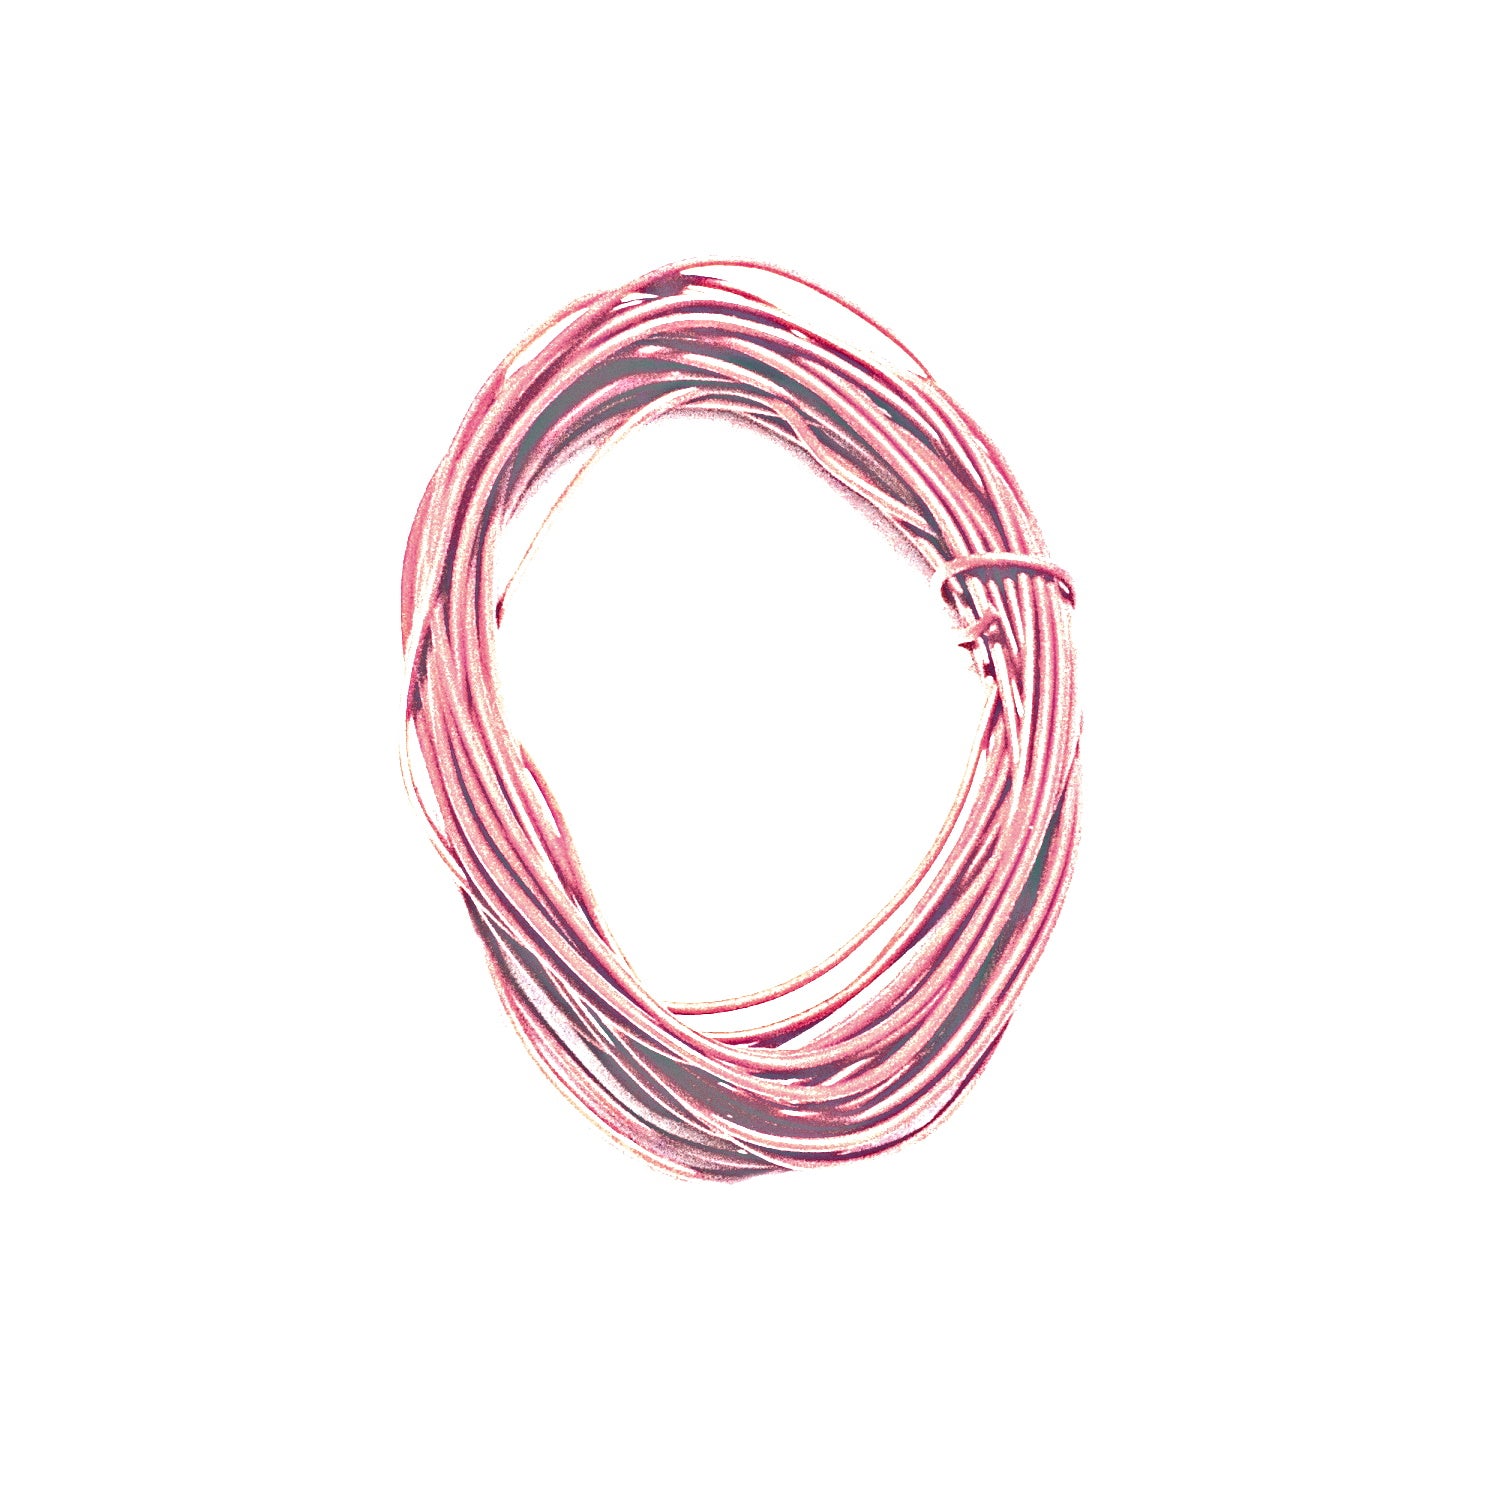 1/0.6mm Solid Core Equipment Wire Hook up Cable 5M Pink